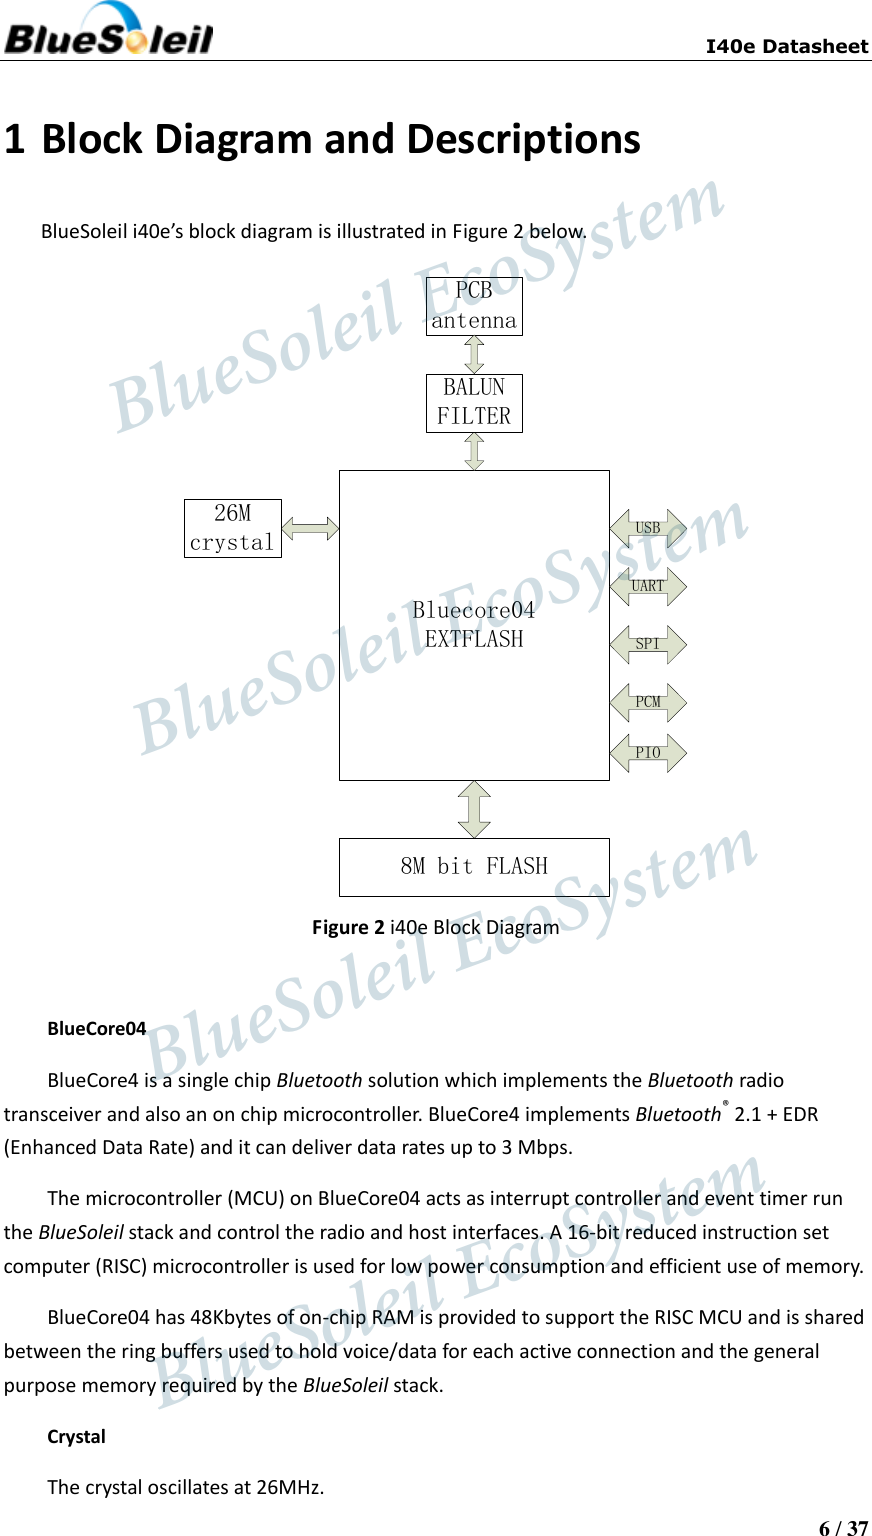                          I40e Datasheet  6 / 37  1 Block Diagram and Descriptions BlueSoleil i40e’s block diagram is illustrated in Figure 2 below. Bluecore04EXTFLASH26Mcrystal8M bit FLASHBALUNFILTERPCBantennaUSBUARTSPIPCMPIO Figure 2 i40e Block Diagram  BlueCore04   BlueCore4 is a single chip Bluetooth solution which implements the Bluetooth radio transceiver and also an on chip microcontroller. BlueCore4 implements Bluetooth® 2.1 + EDR (Enhanced Data Rate) and it can deliver data rates up to 3 Mbps.   The microcontroller (MCU) on BlueCore04 acts as interrupt controller and event timer run the BlueSoleil stack and control the radio and host interfaces. A 16-bit reduced instruction set computer (RISC) microcontroller is used for low power consumption and efficient use of memory.   BlueCore04 has 48Kbytes of on-chip RAM is provided to support the RISC MCU and is shared between the ring buffers used to hold voice/data for each active connection and the general purpose memory required by the BlueSoleil stack.   Crystal   The crystal oscillates at 26MHz.                    BlueSoleil EcoSystem            BlueSoleil EcoSystem      BlueSoleil EcoSystemBlueSoleil EcoSystem